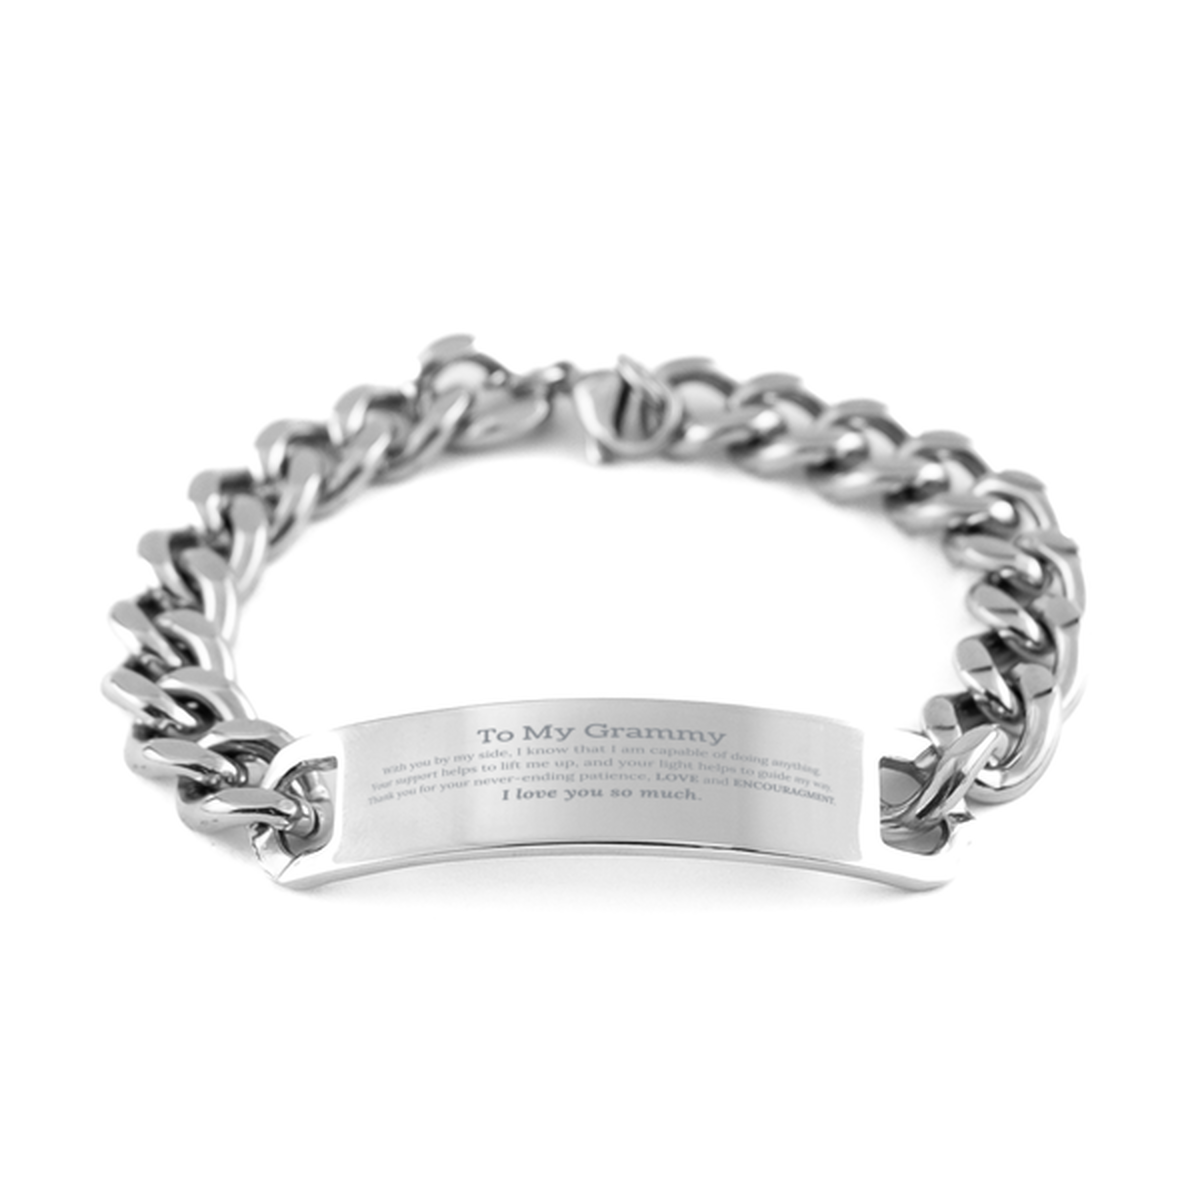 Appreciation Grammy Cuban Chain Stainless Steel Bracelet Gifts, To My Grammy Birthday Christmas Wedding Keepsake Gifts for Grammy With you by my side, I know that I am capable of doing anything. I love you so much